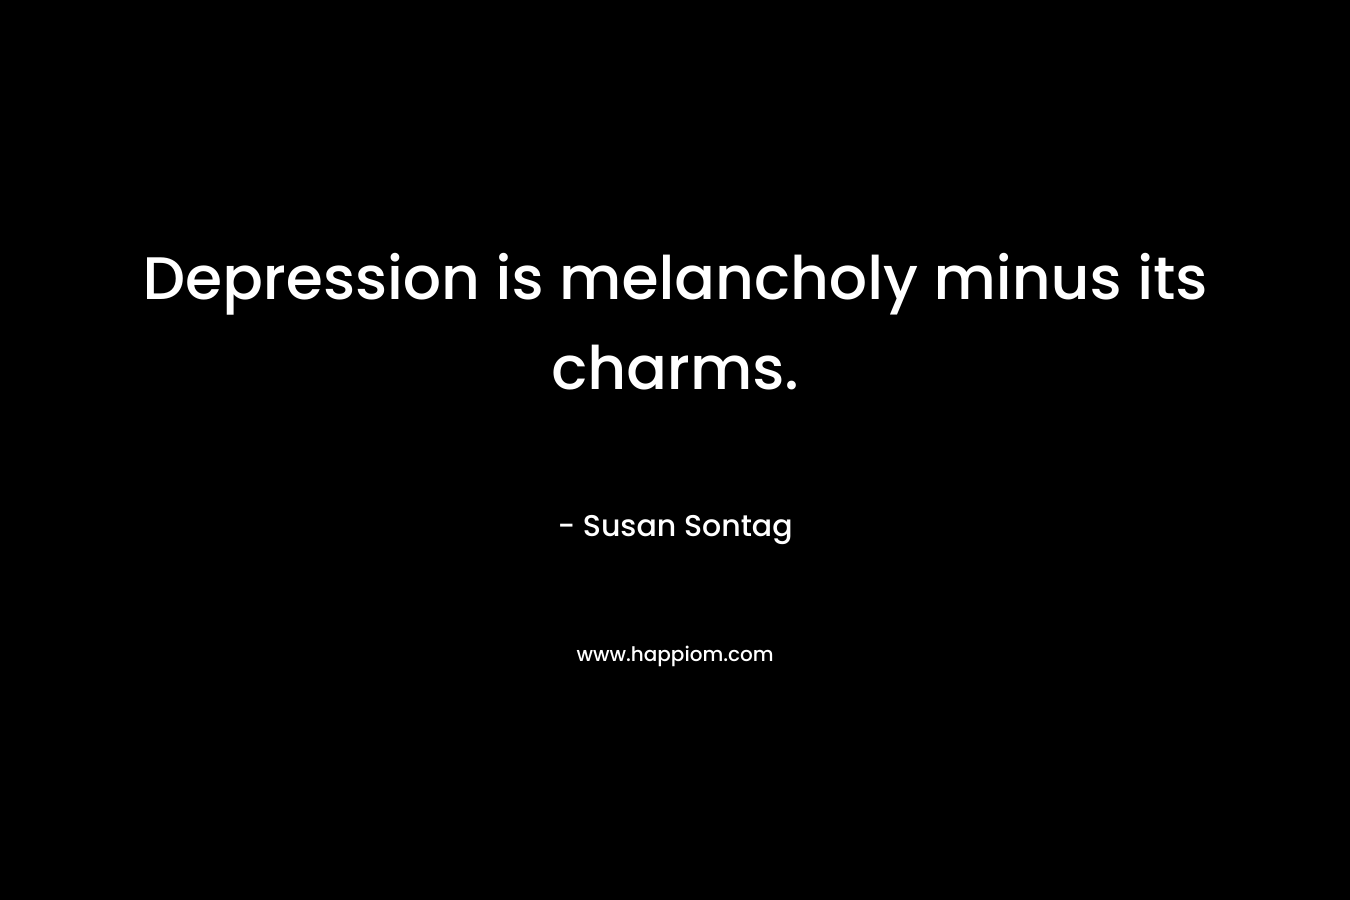 Depression is melancholy minus its charms. – Susan Sontag